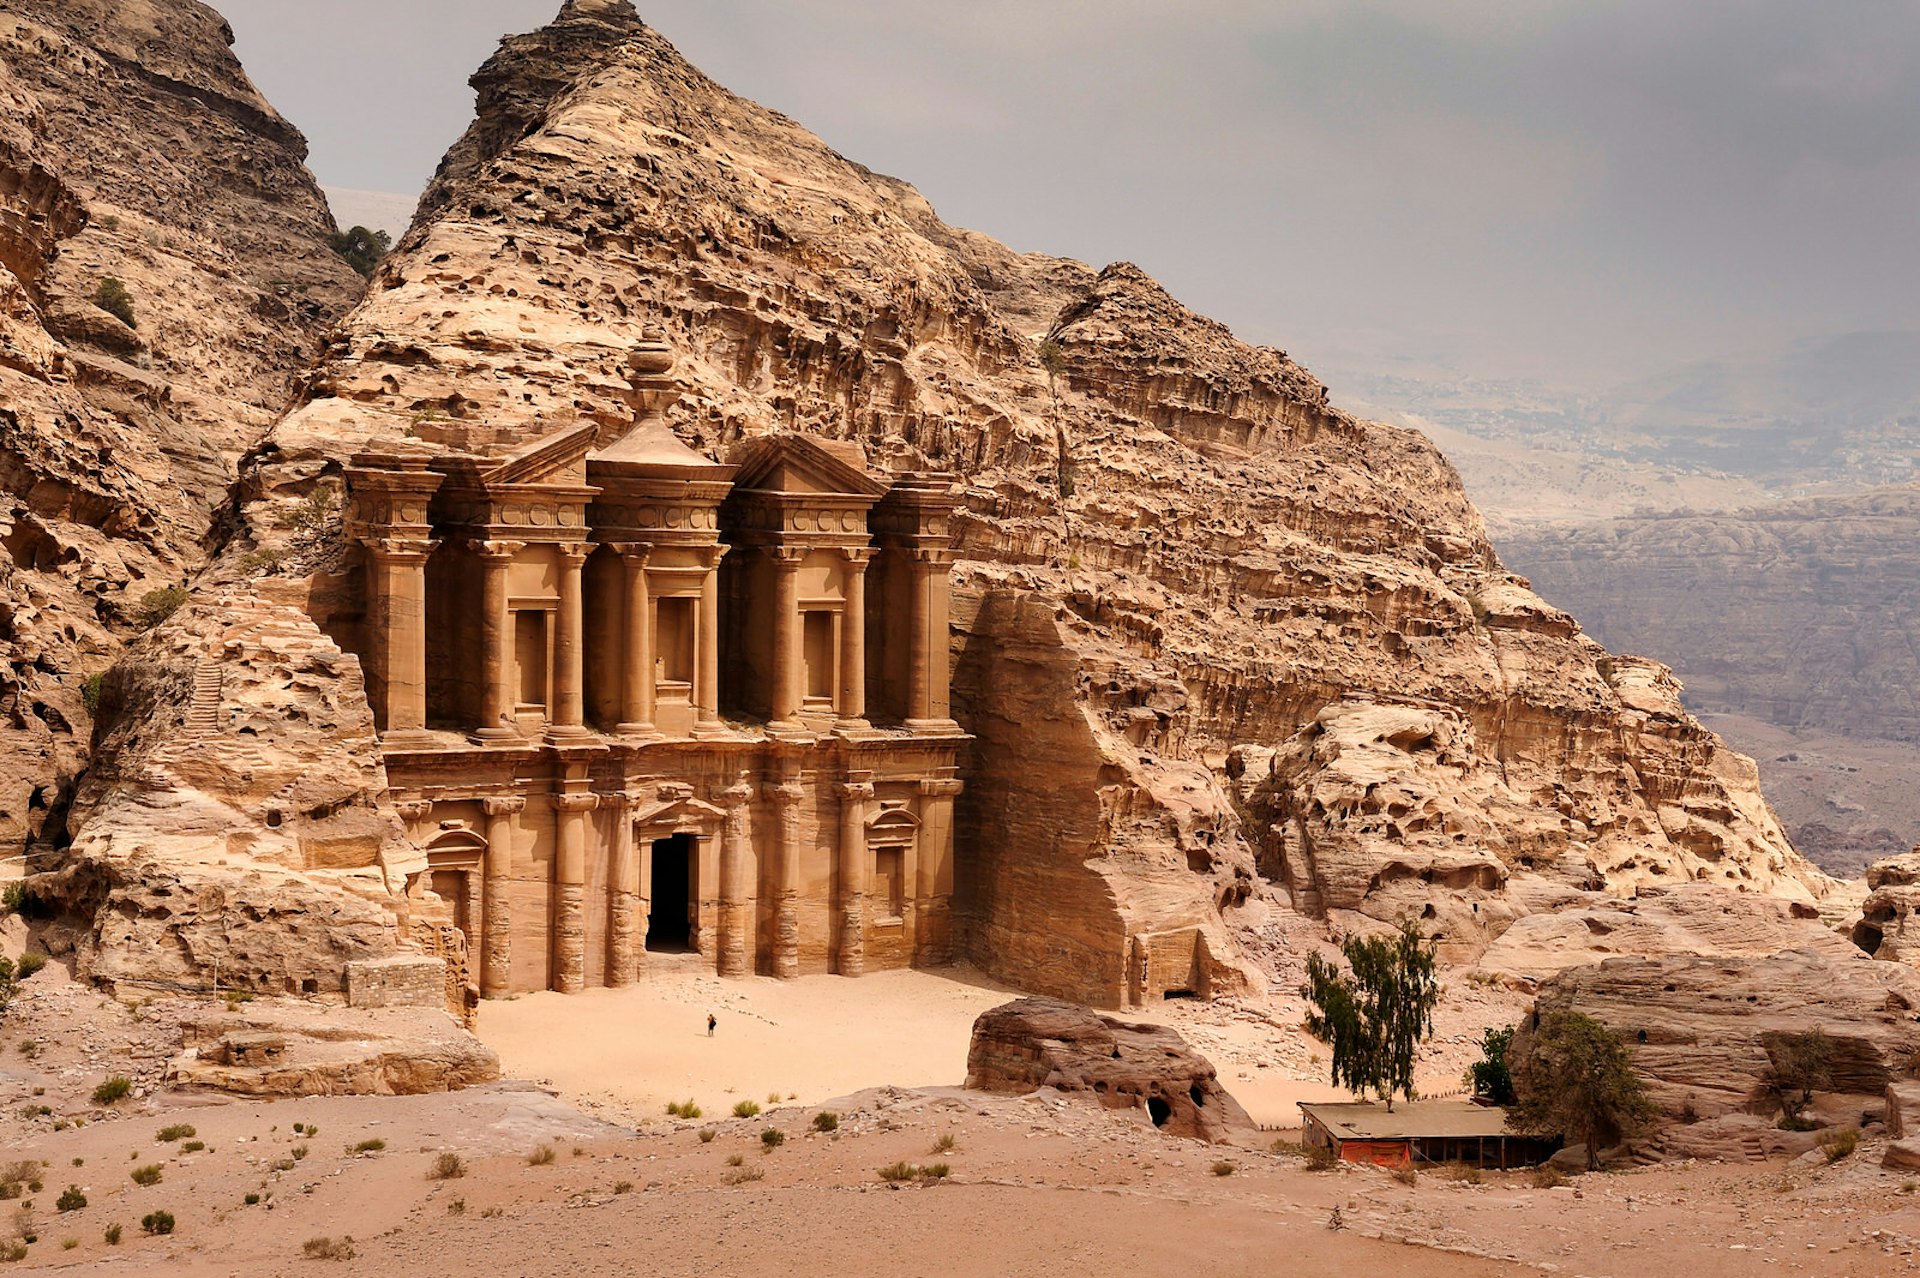 A classic view of El Deir, The Monastery in Petra. Shown in the context of the mountain that the facade was carved out of by the Nabataeans in the 1st century. The facade measures 50 metres wide by approximately 45 meters high. Image by Nick Brundle Photography / Getty Images